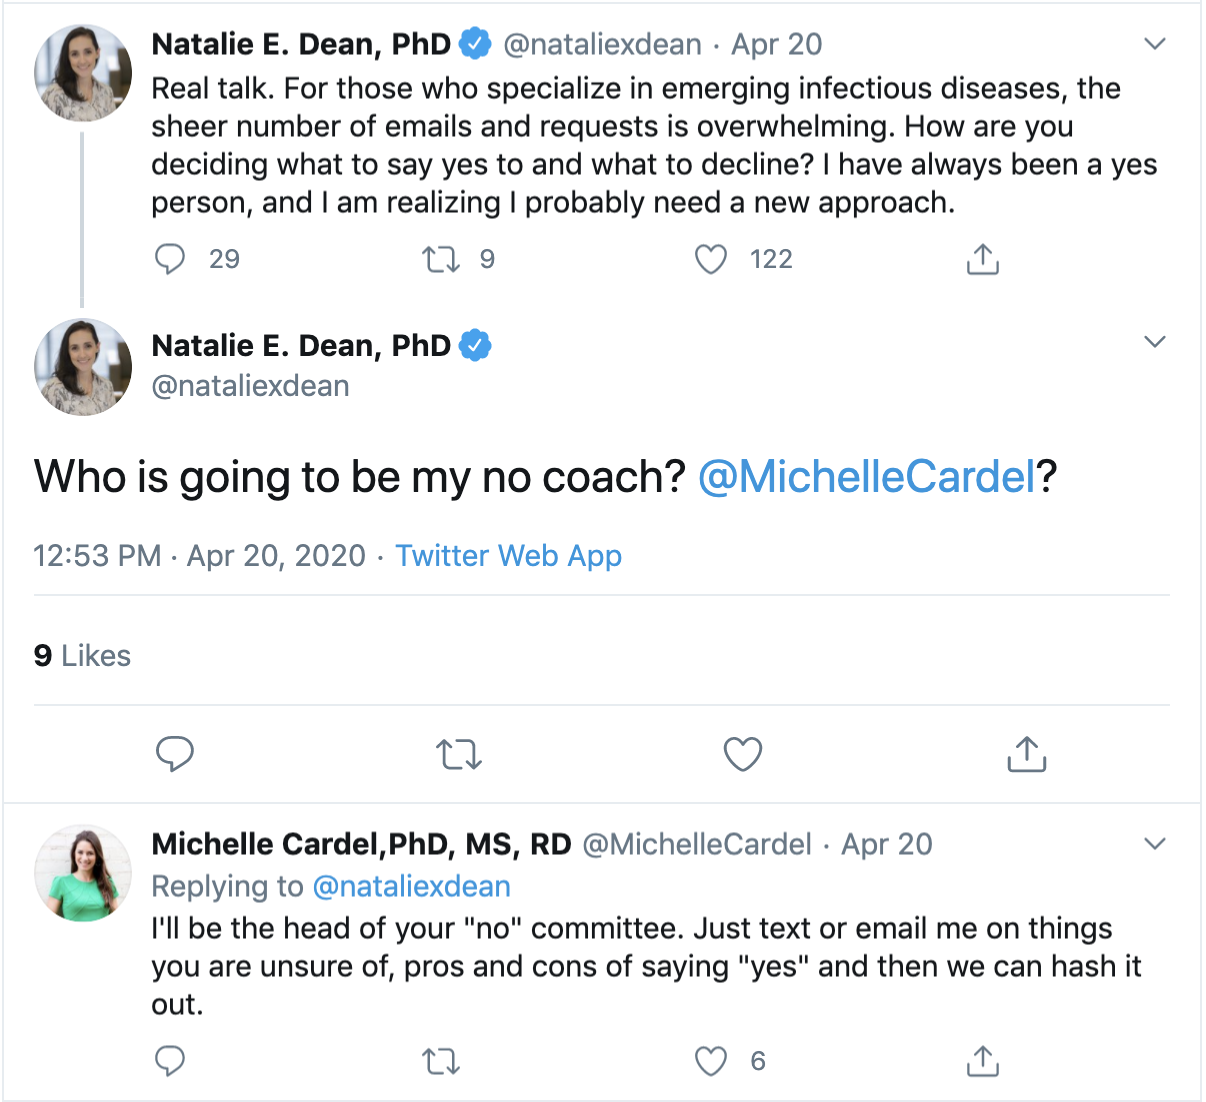 tweet where Dean asks Cardel to help her decide which requests to say no to.